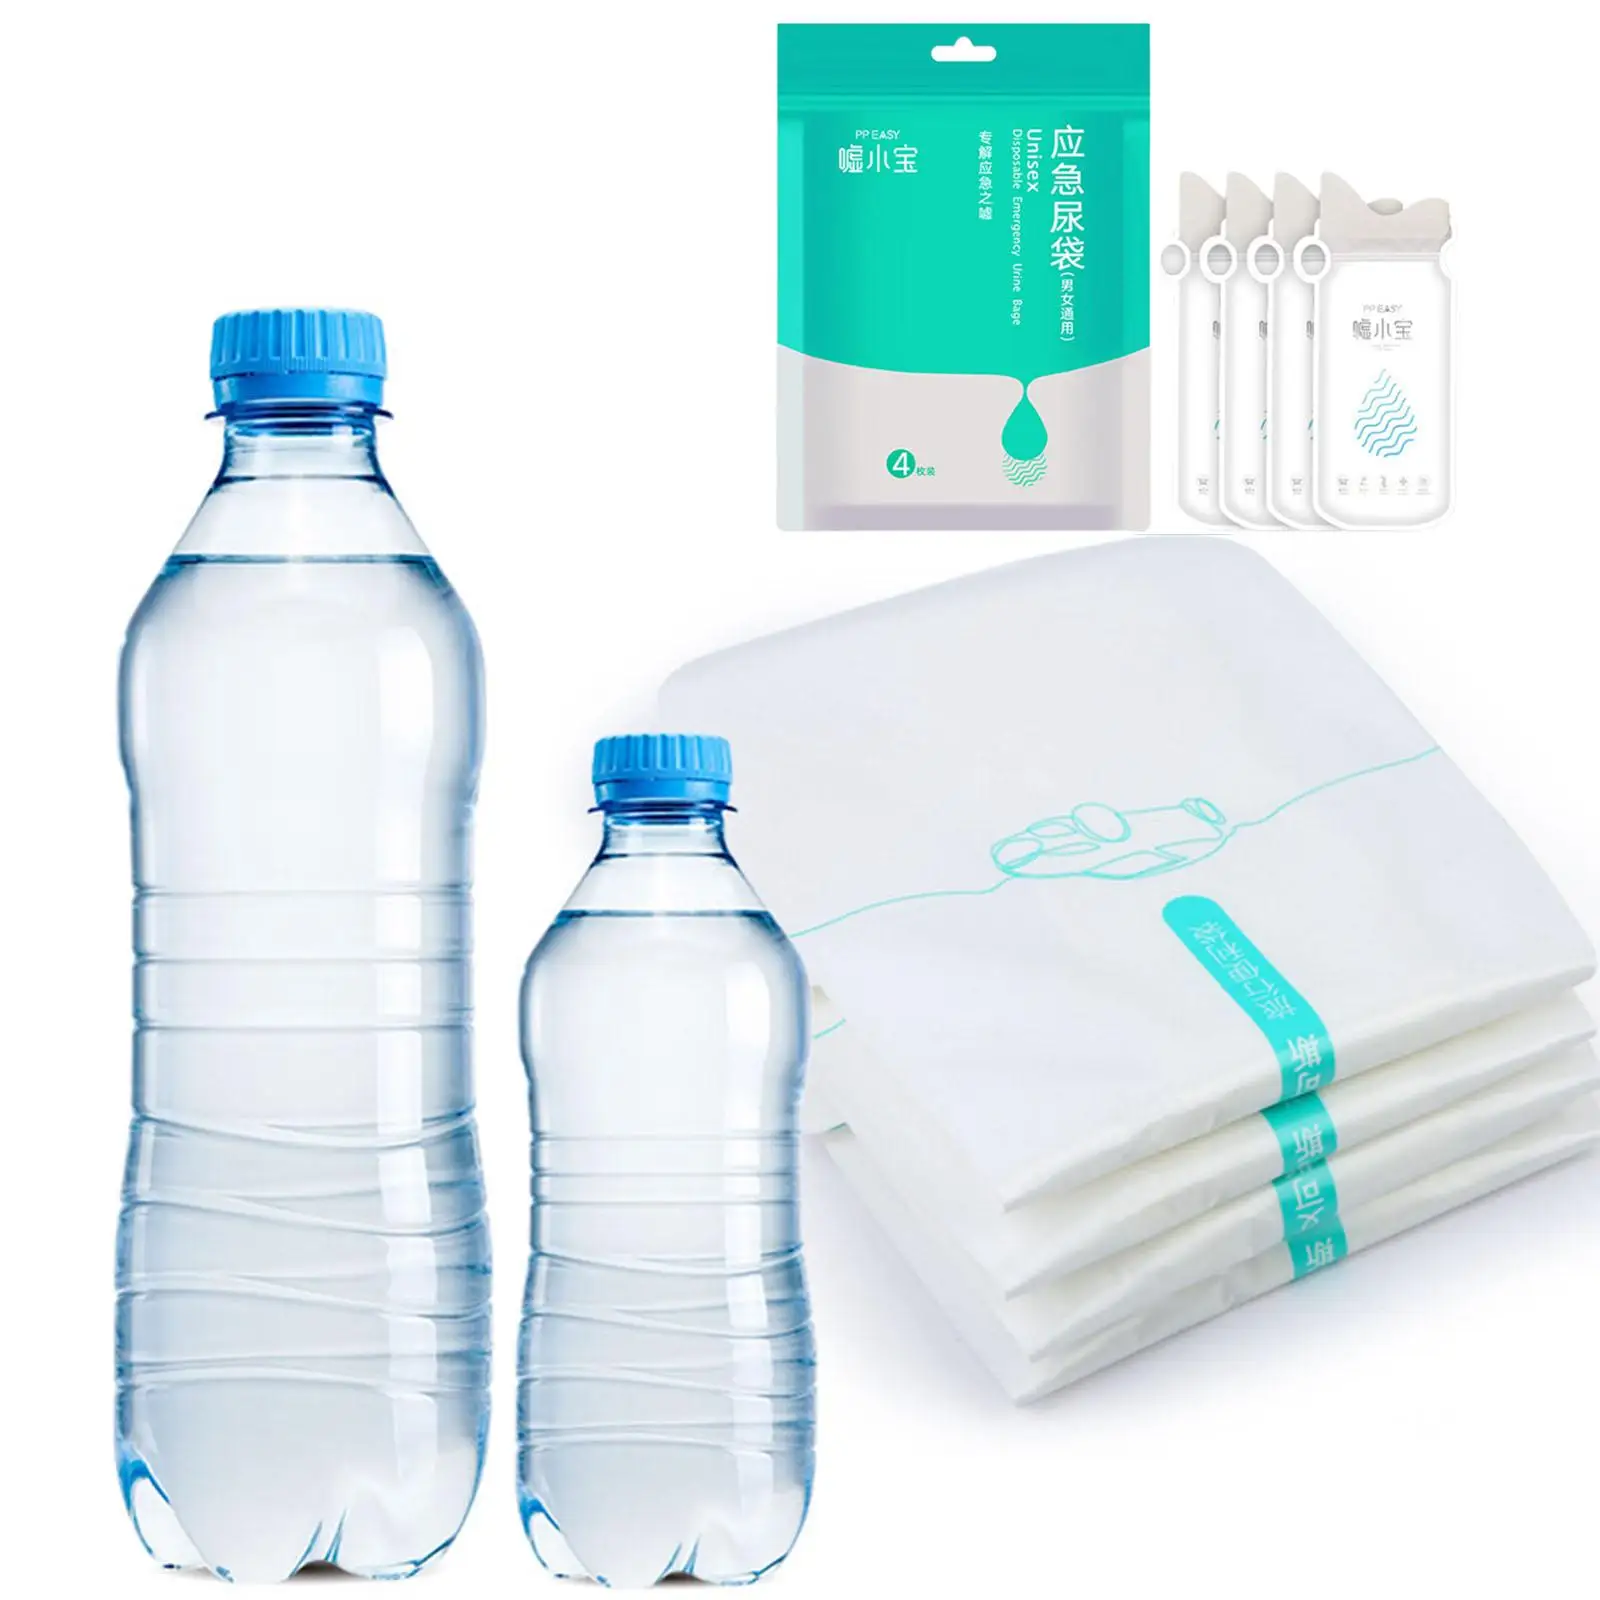 4Pcs Disposable Urinal Bags Unisex Fit for Emergency Car Sickness Travel